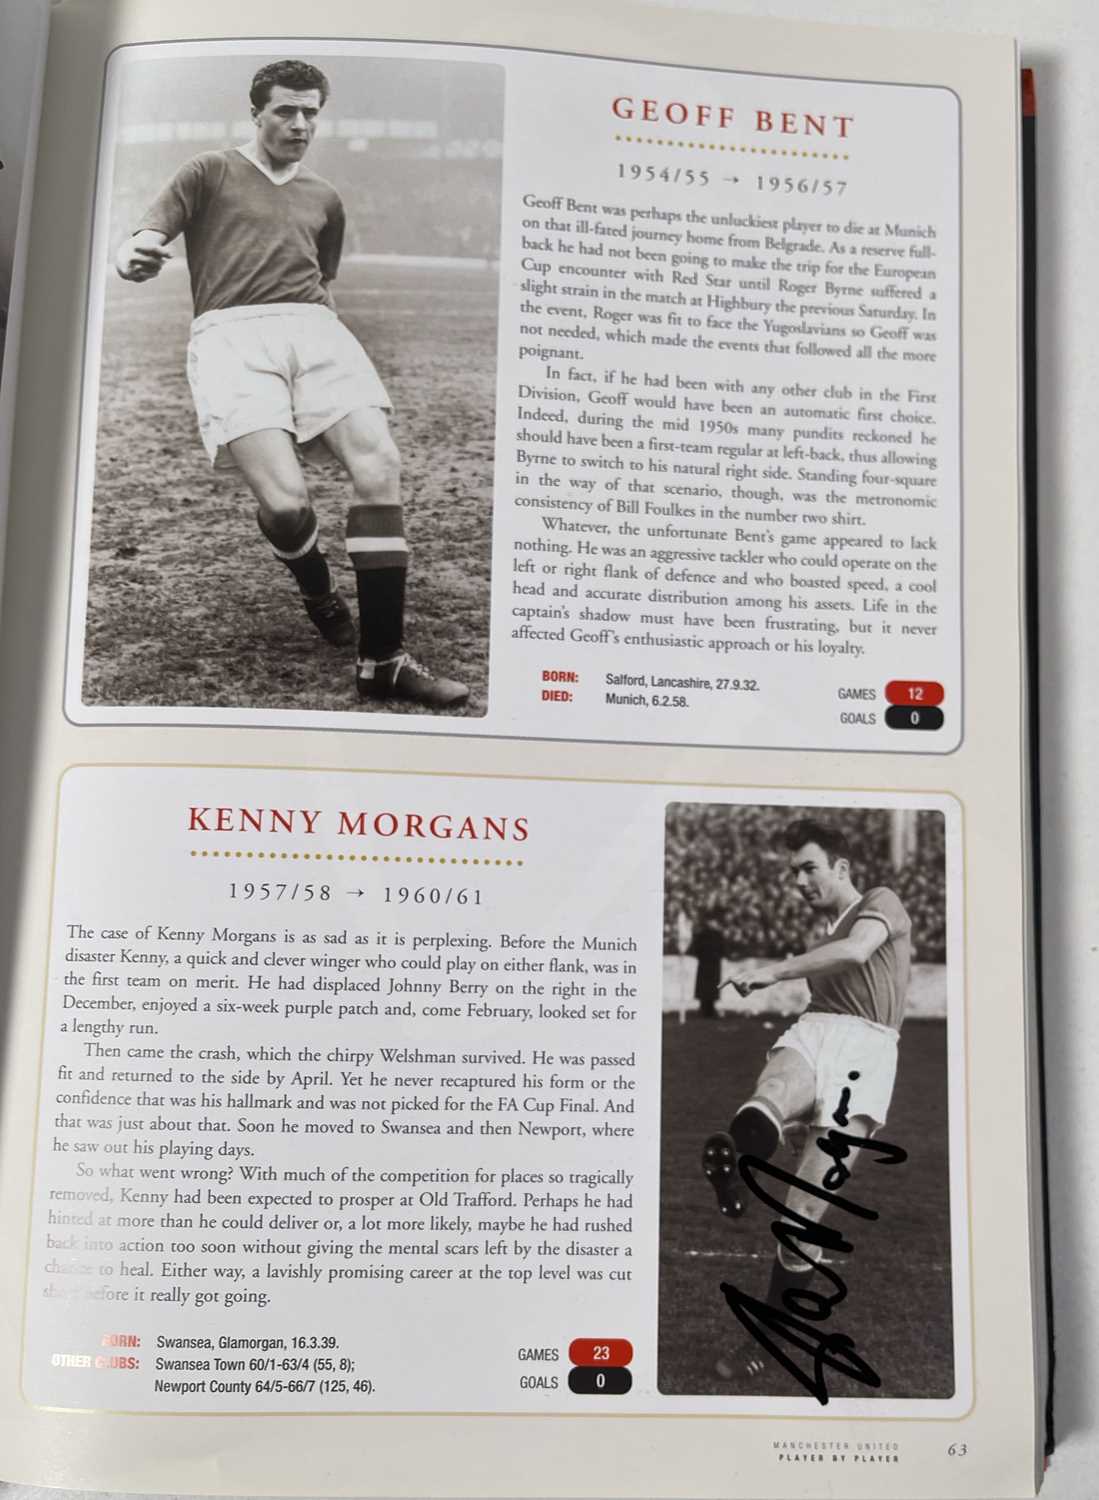 FOOTBALL MEMORABILIA - MANCHESTER UNITED MULTI SIGNED 'PLAYER BY PLAYER' BOOK. - Image 7 of 50